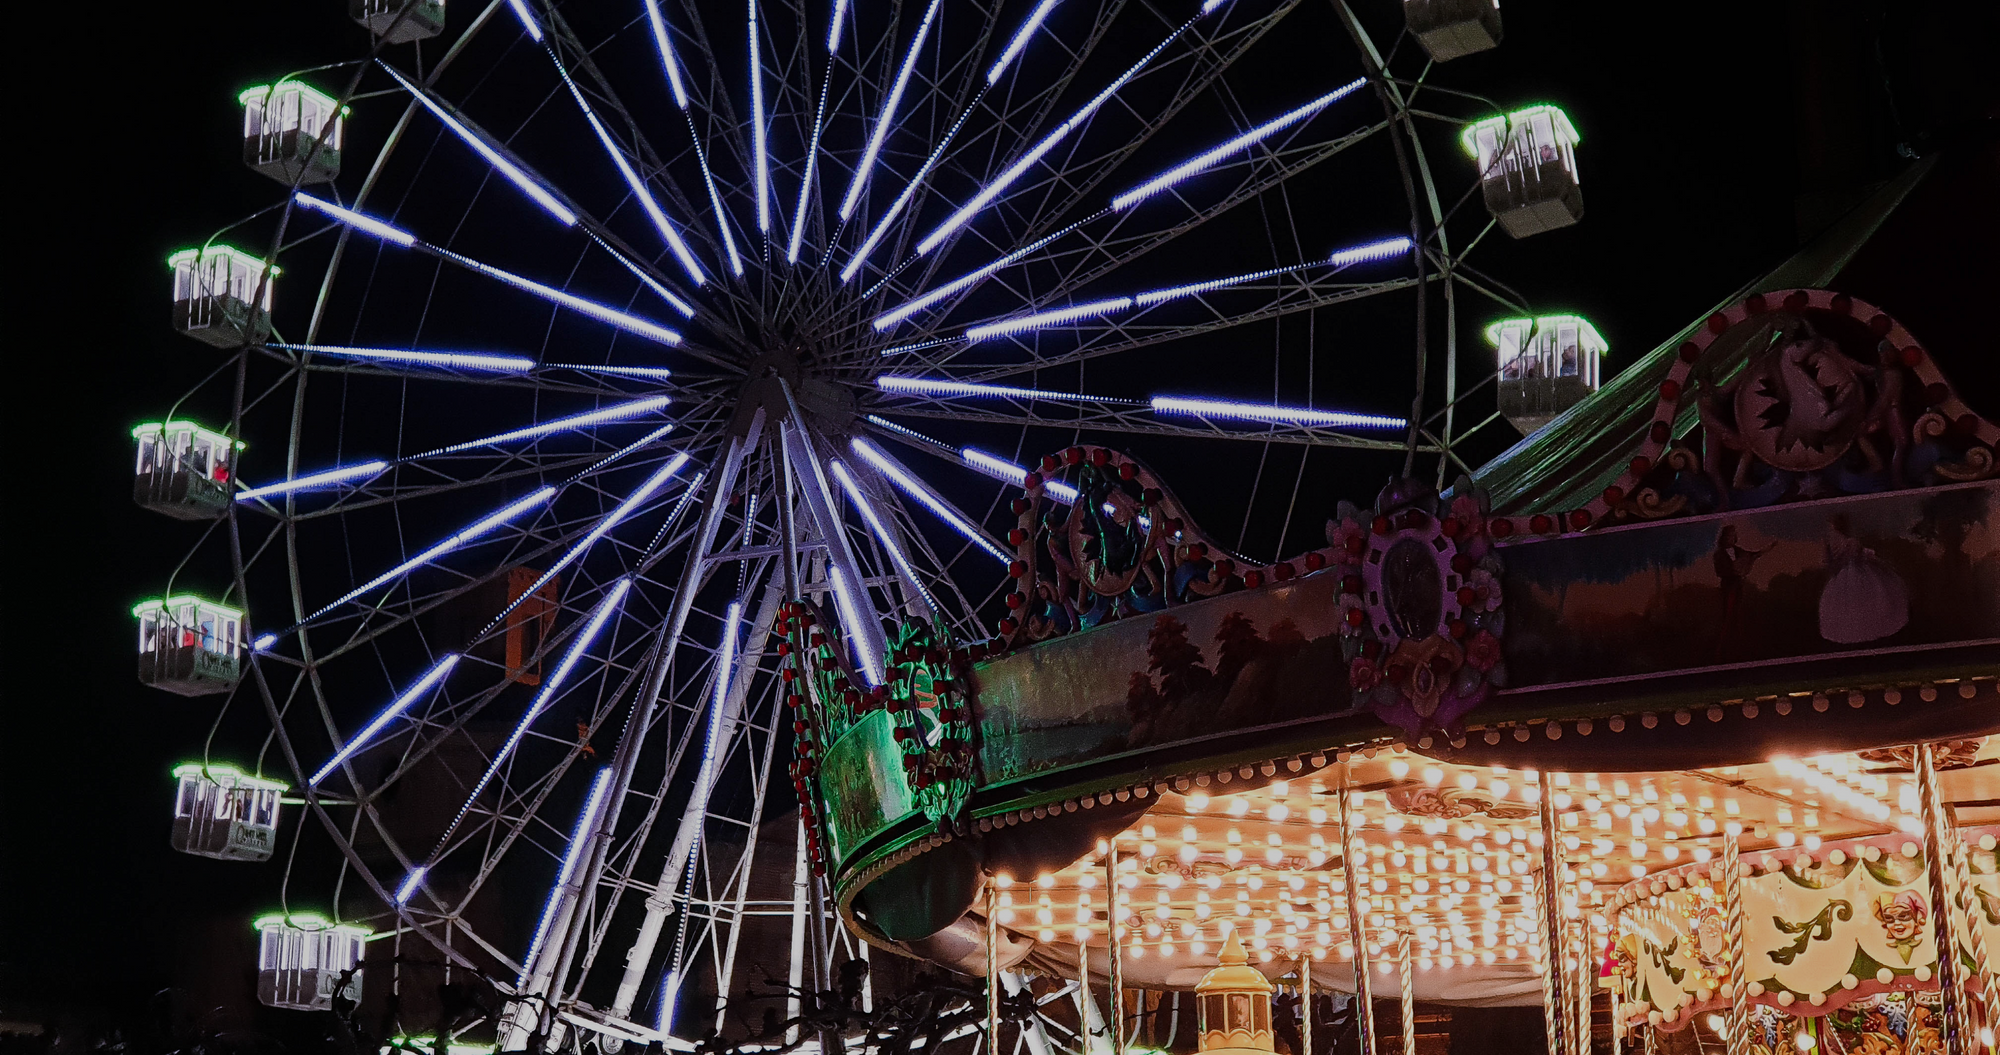 western equestrian apparel to wear to the county fair, brightly colored ferris wheel against the night sky. 